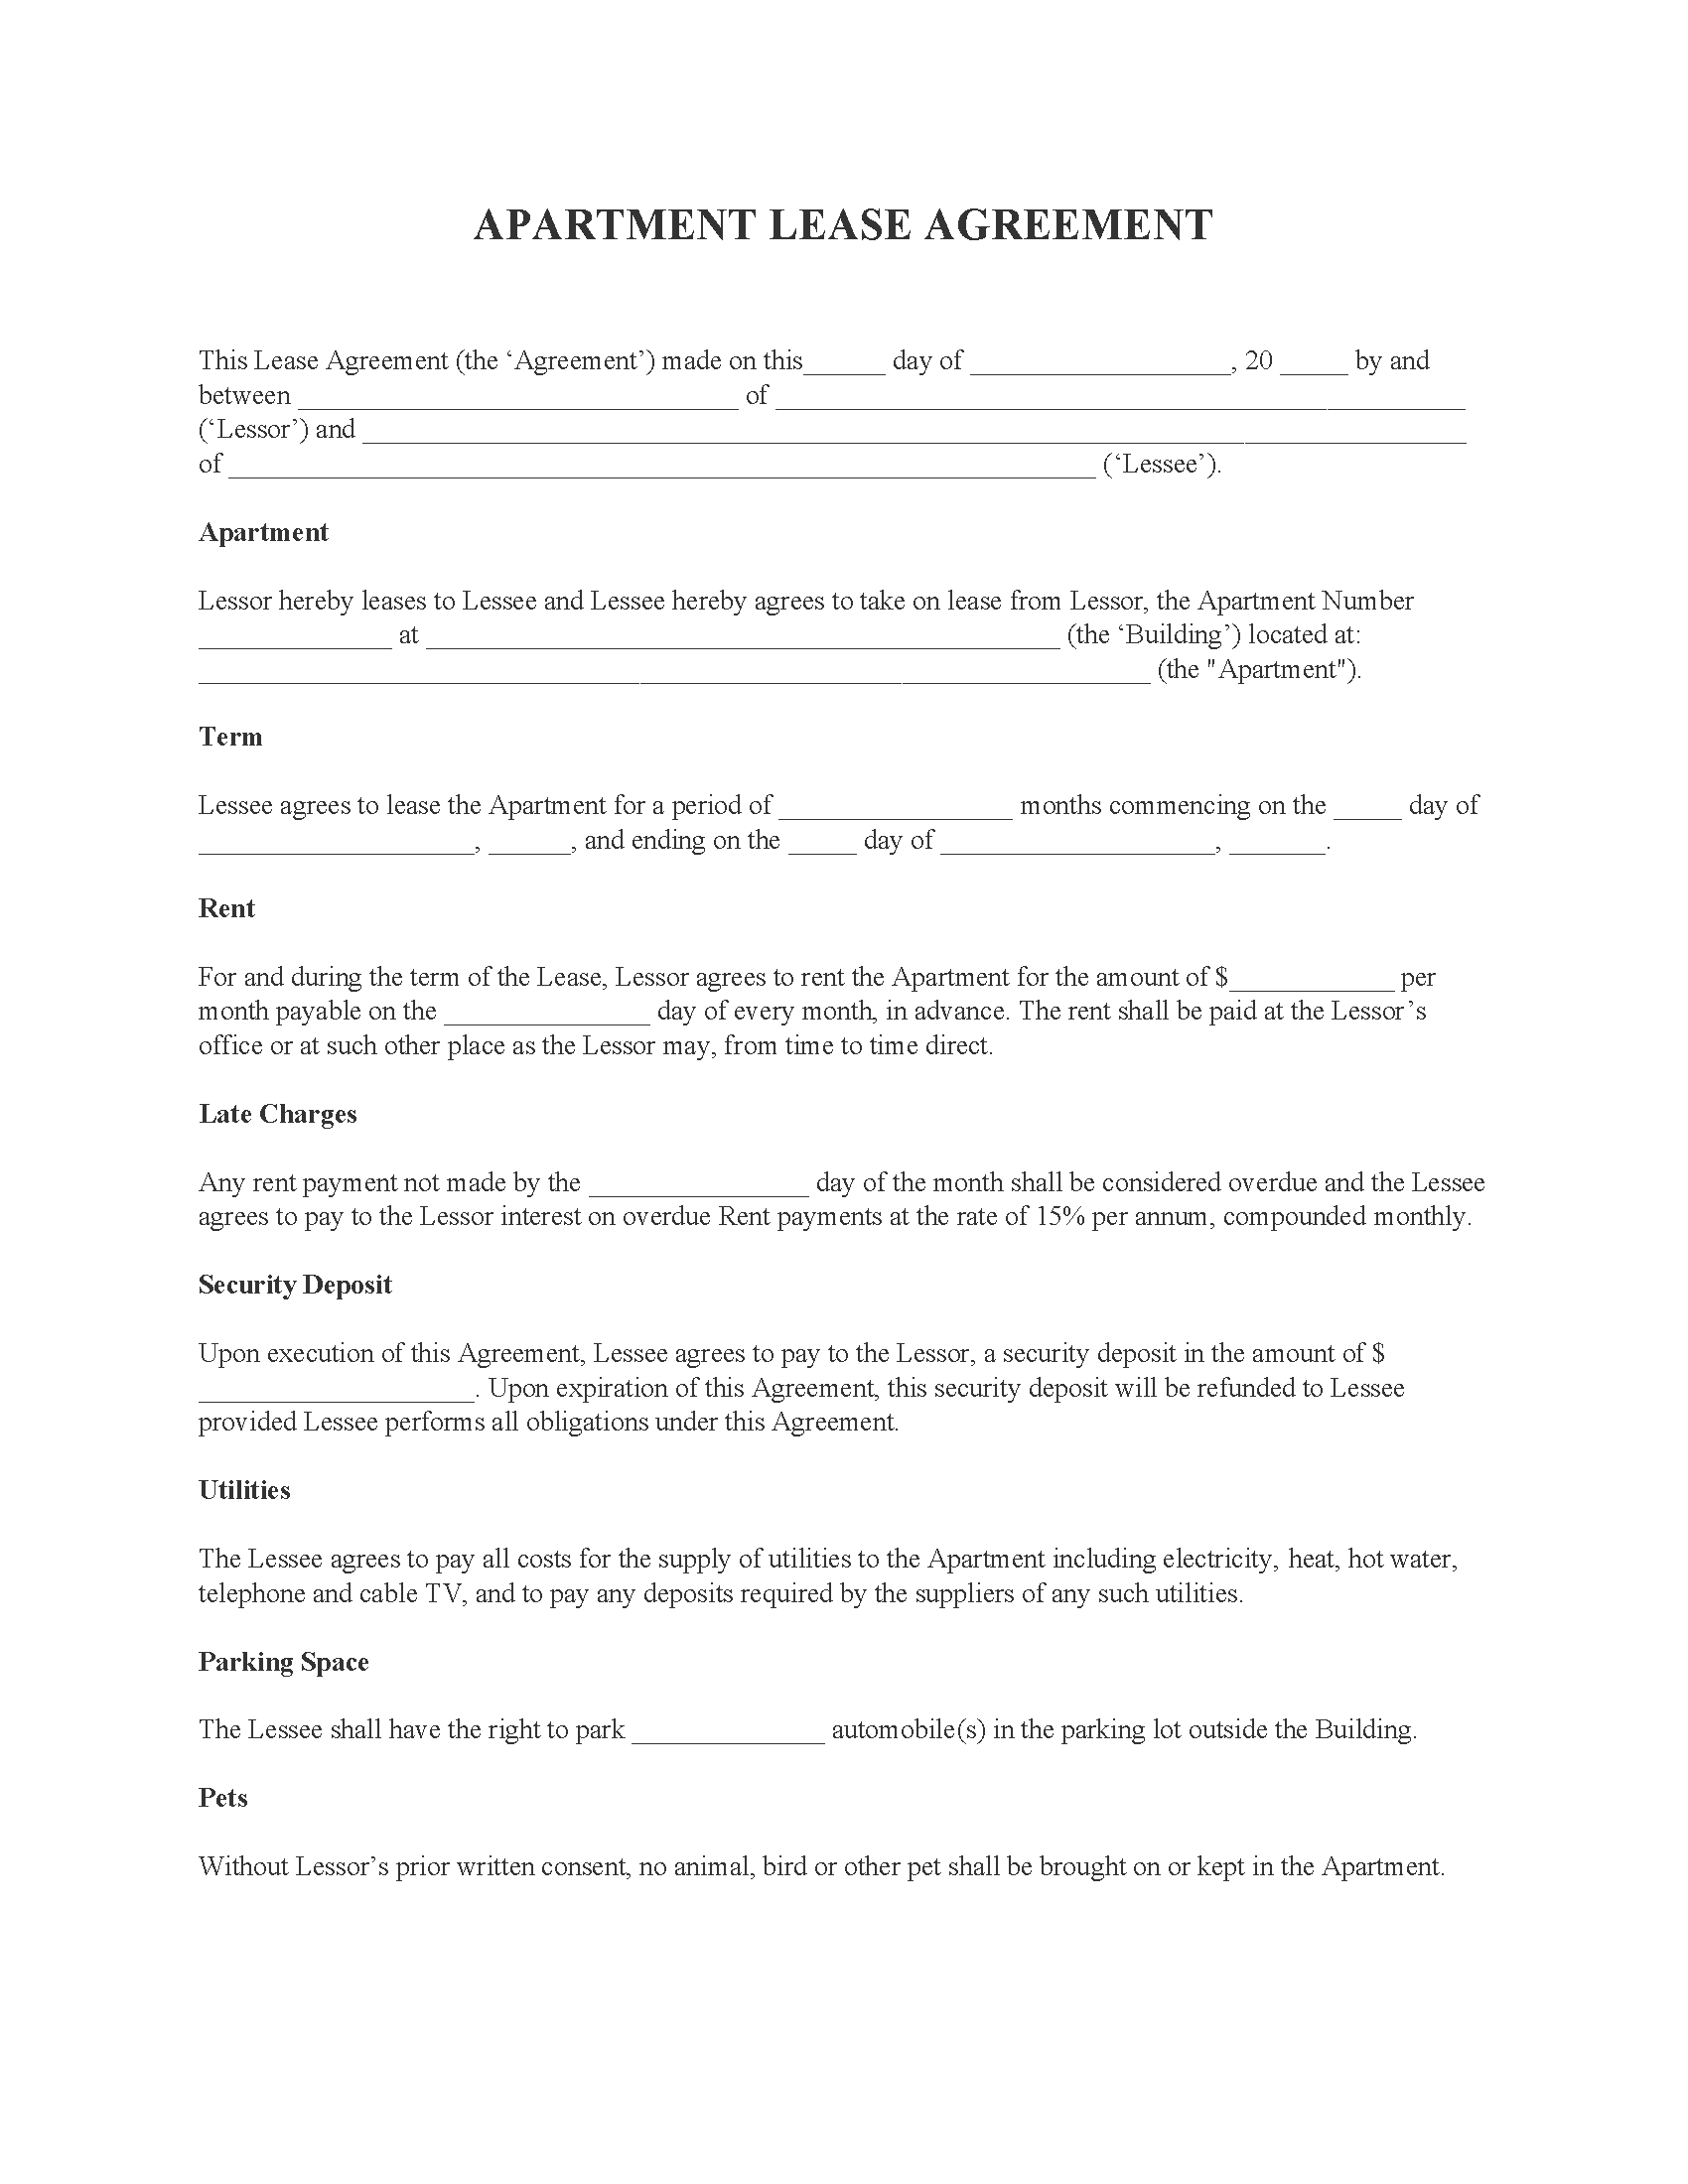 apartment-lease-agreement-fillable-pdf-free-printable-legal-forms